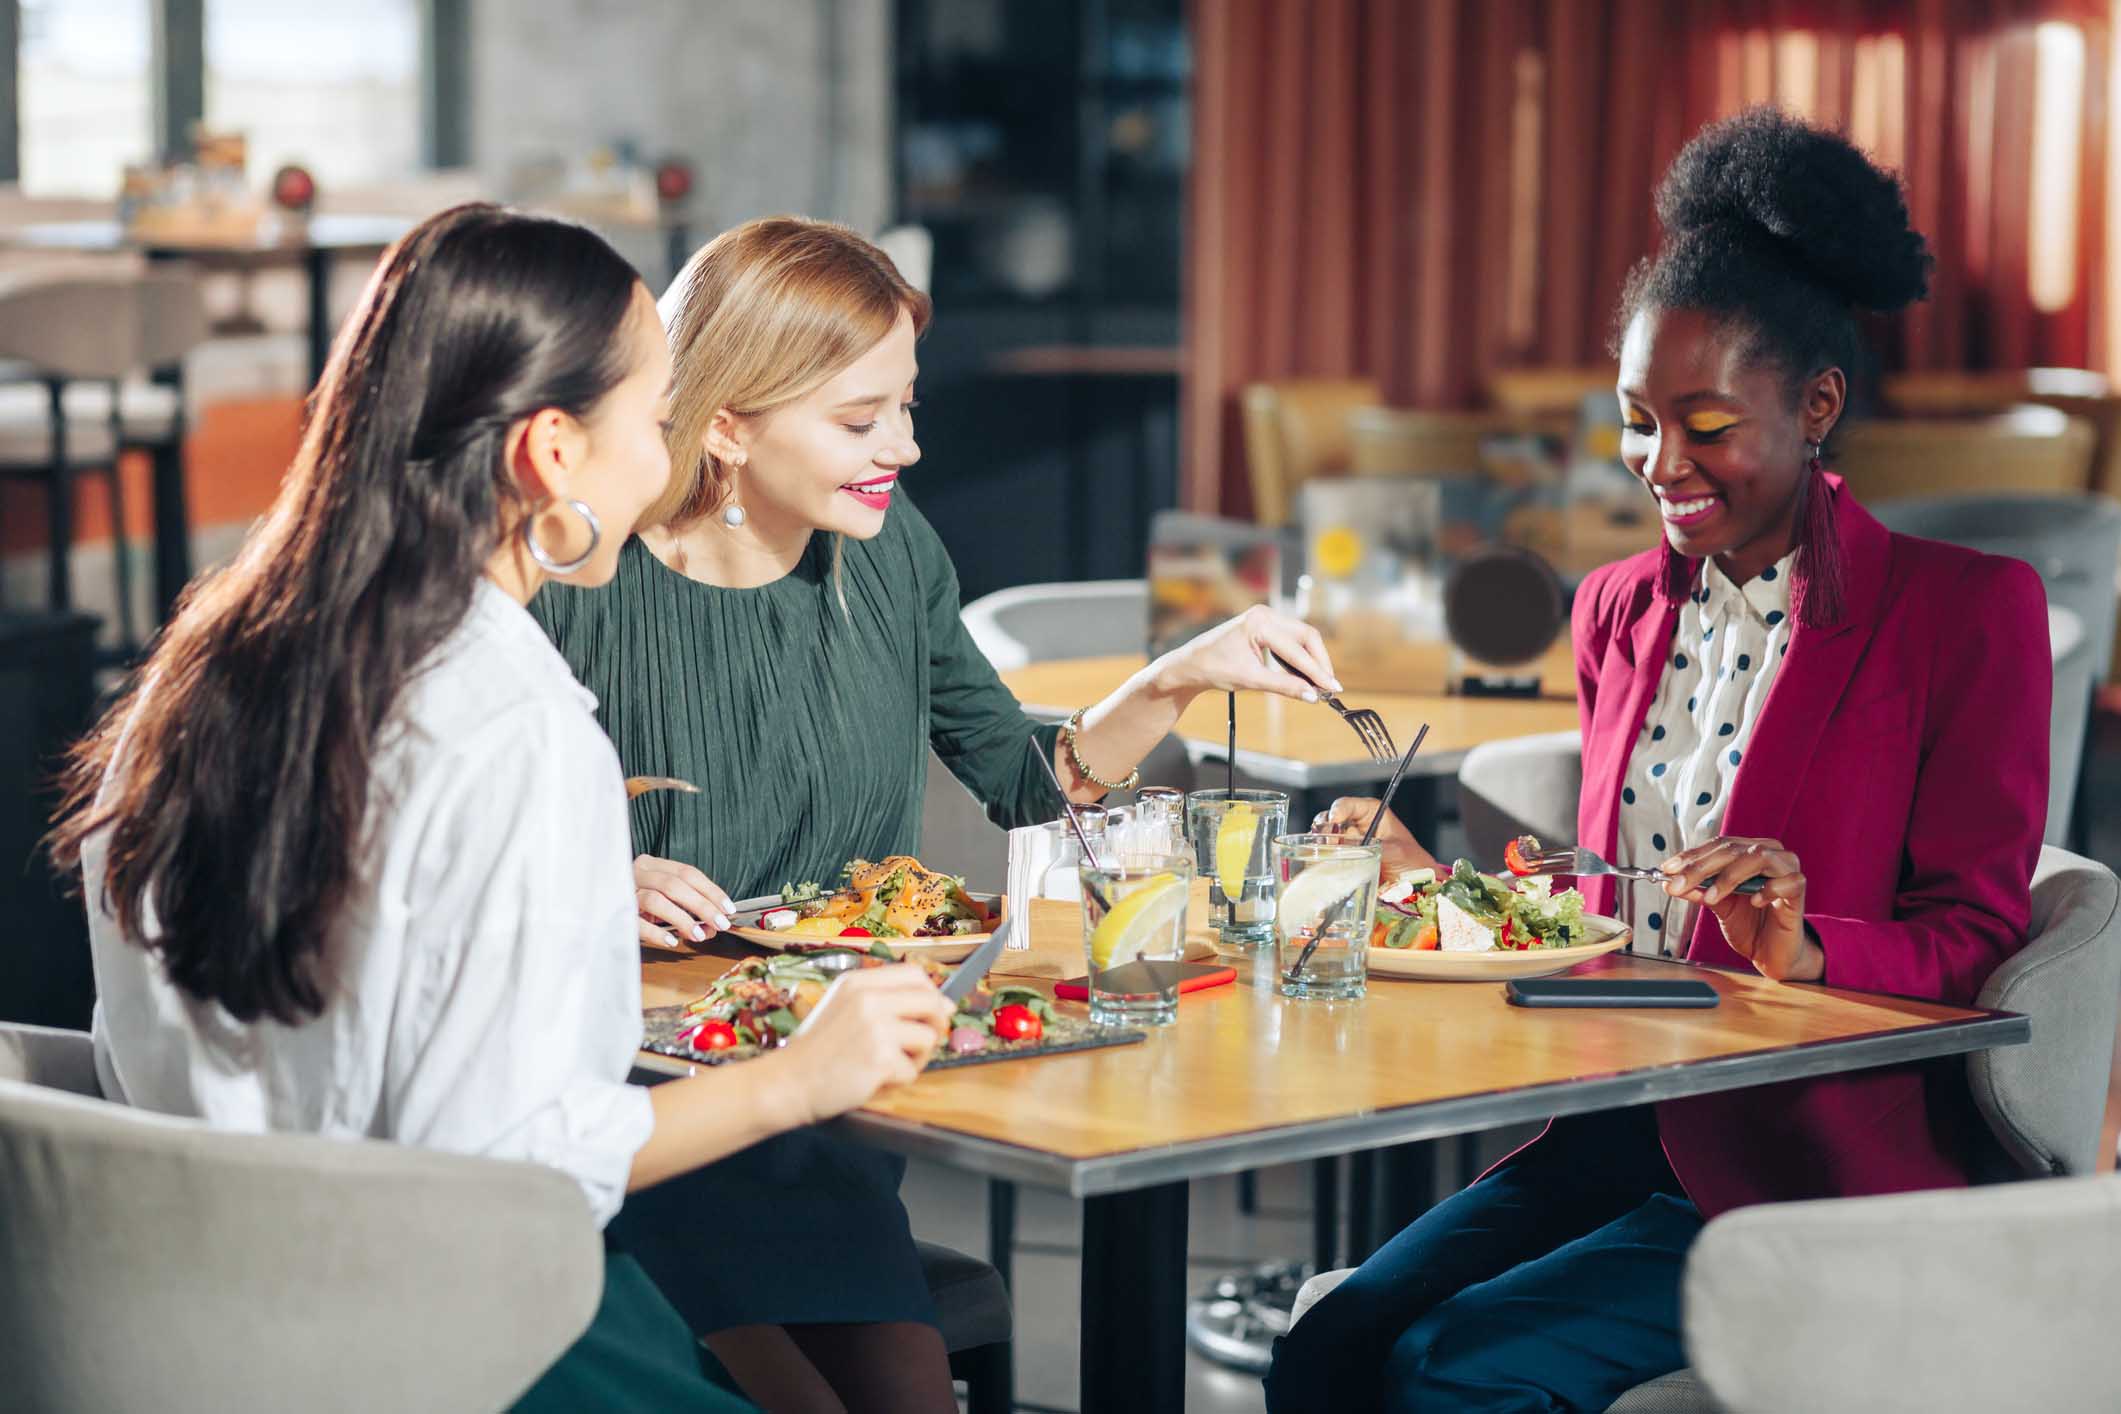 Maintaining Your Waistline: Tips to Eating a Balanced Meal When Dining Out